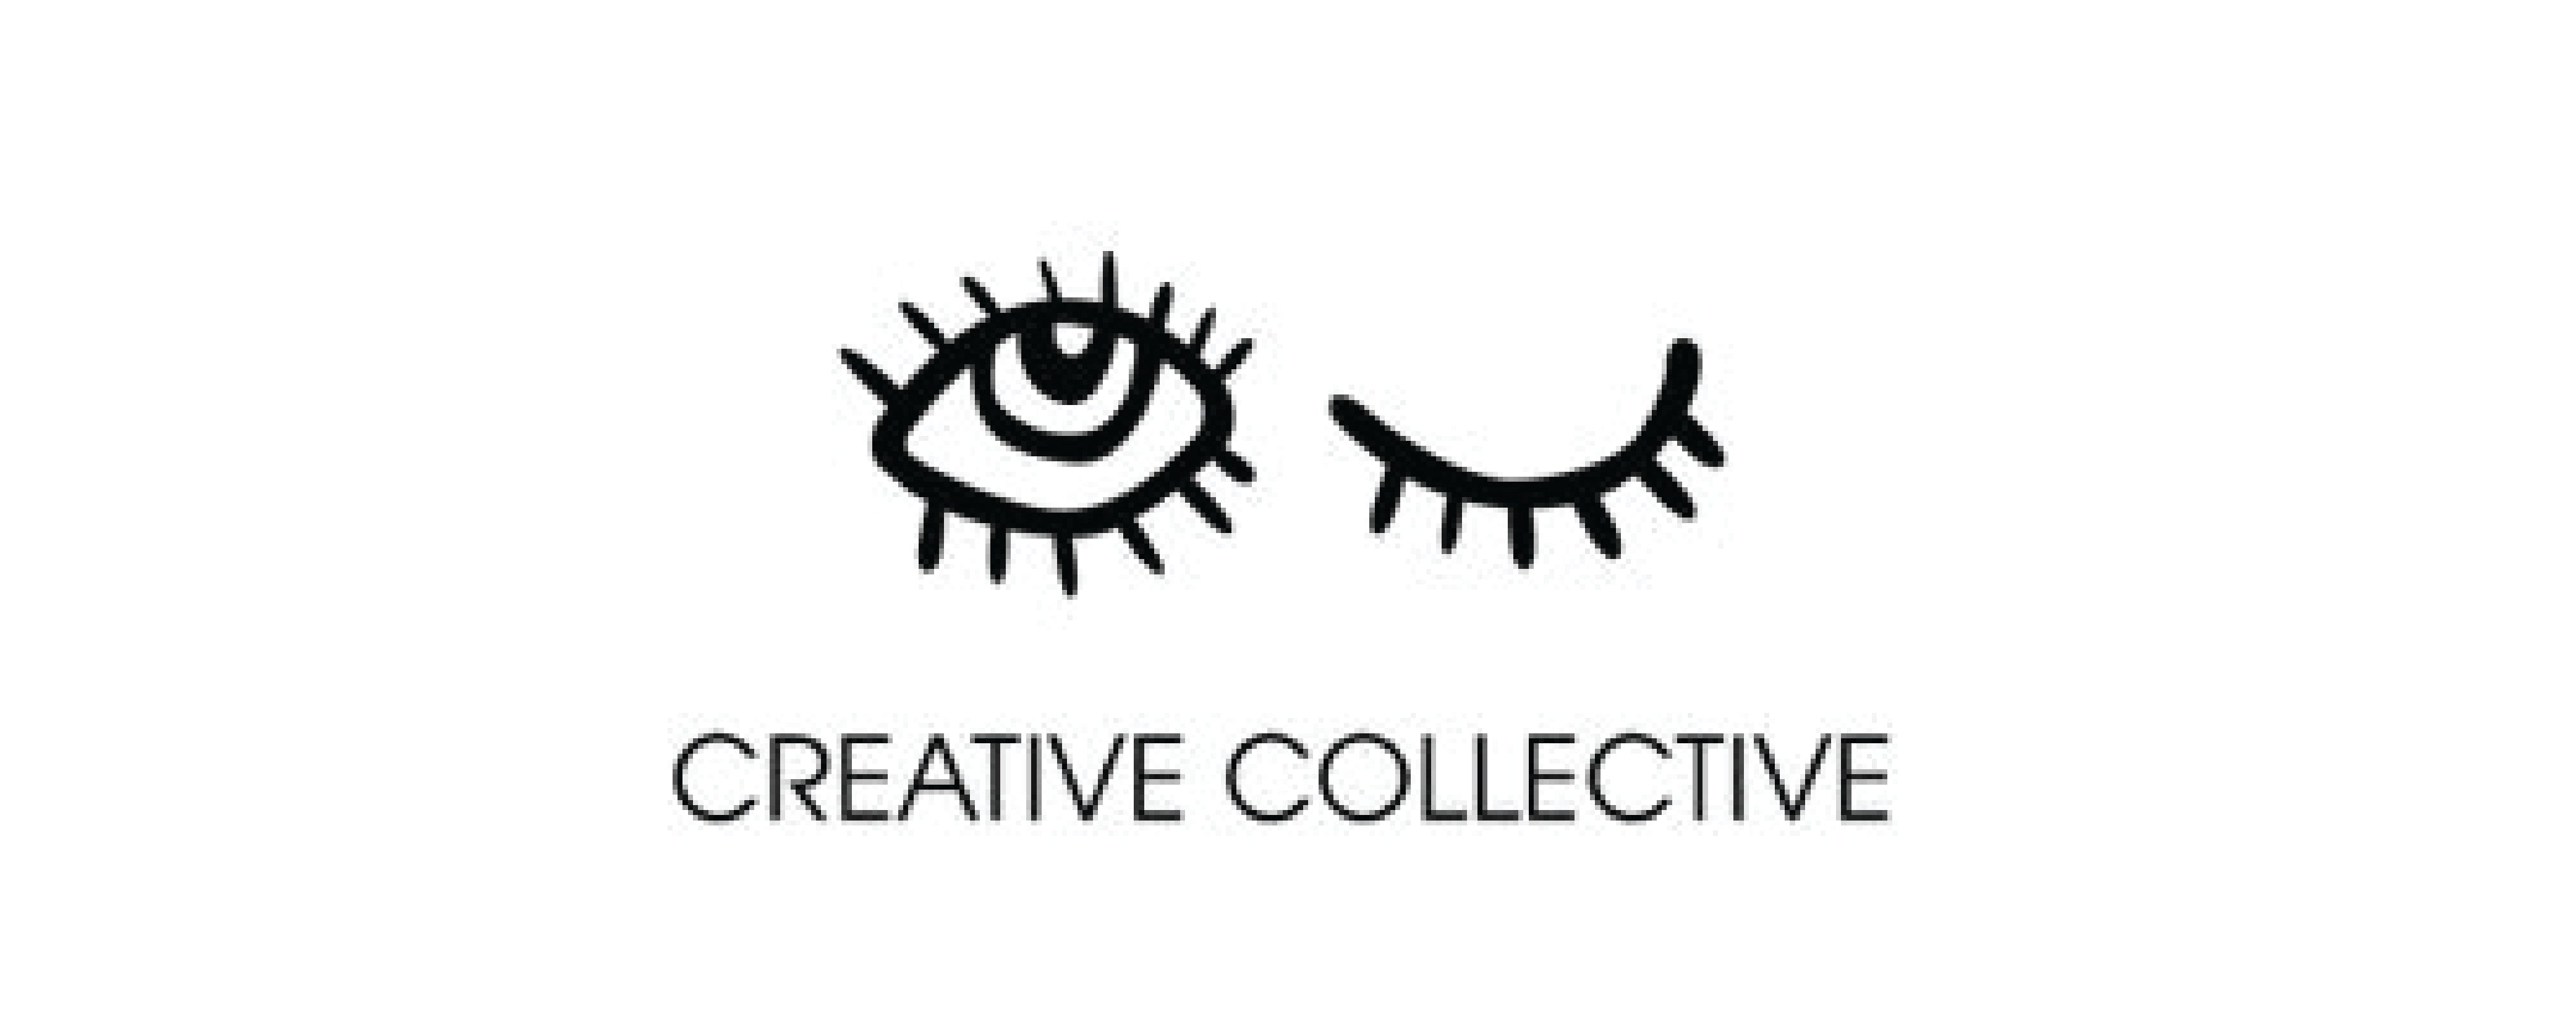 Featured on CreativeCollective.Miami